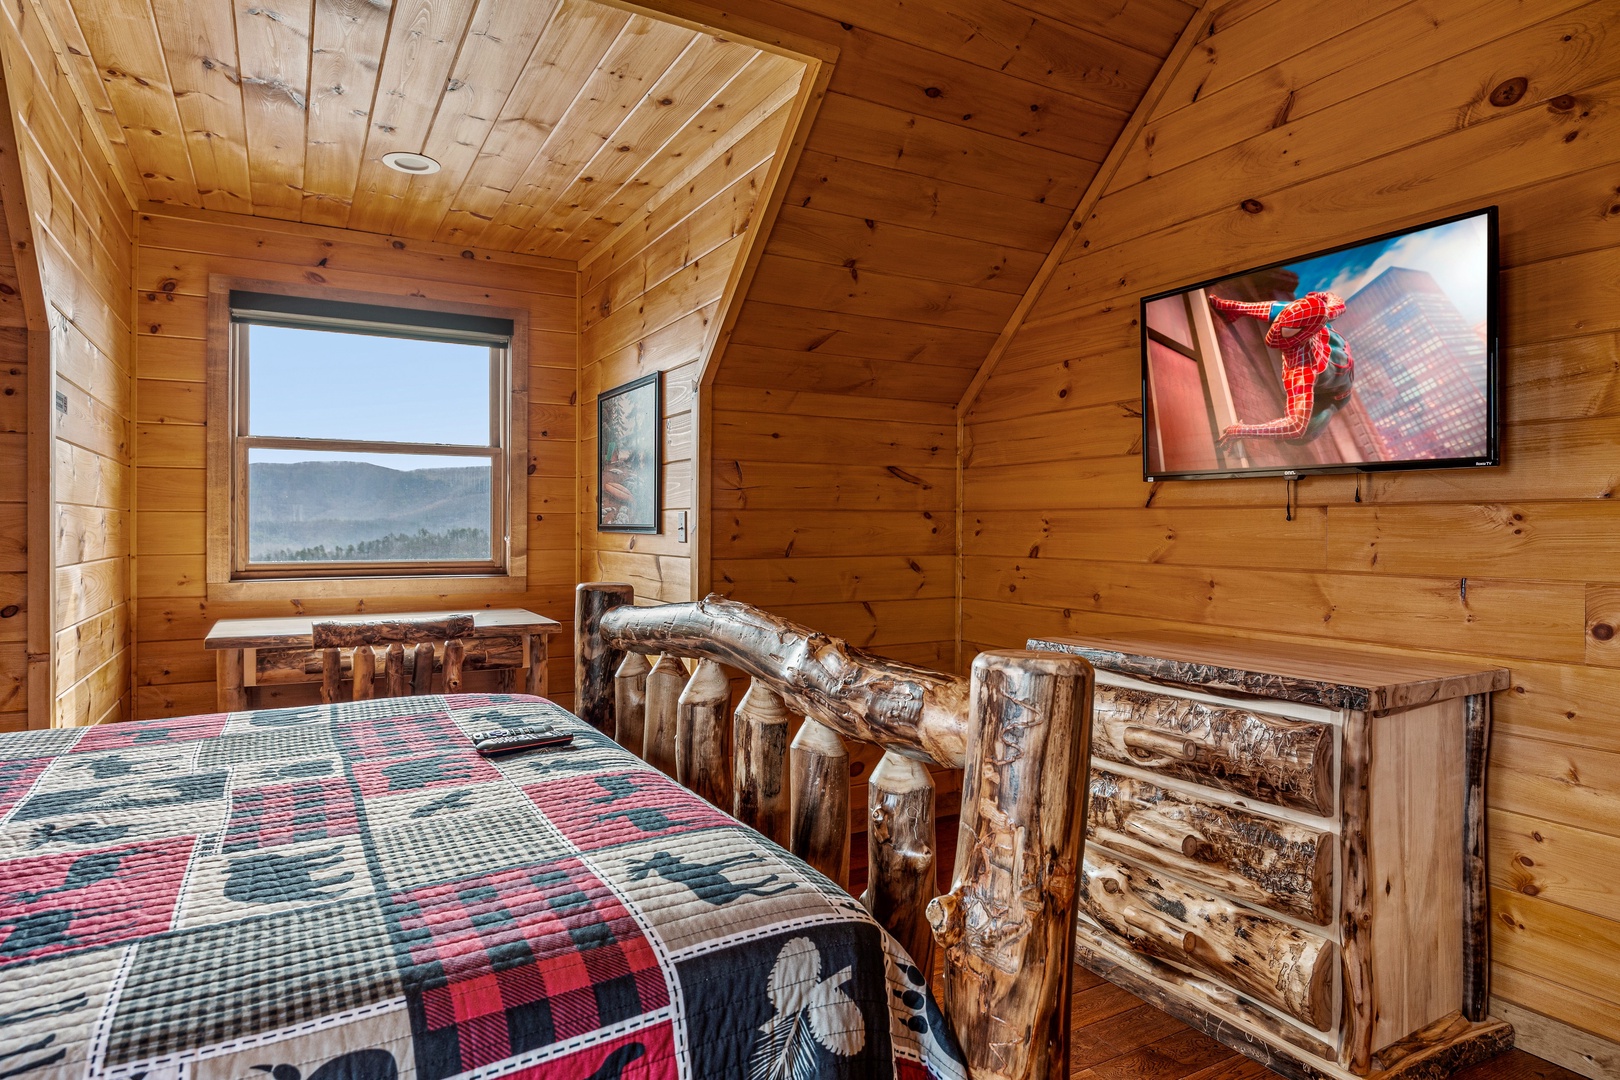 Log bedroom with mountain view at Four Seasons Grand, a 5 bedroom cabin rental located in Pigeon Forge